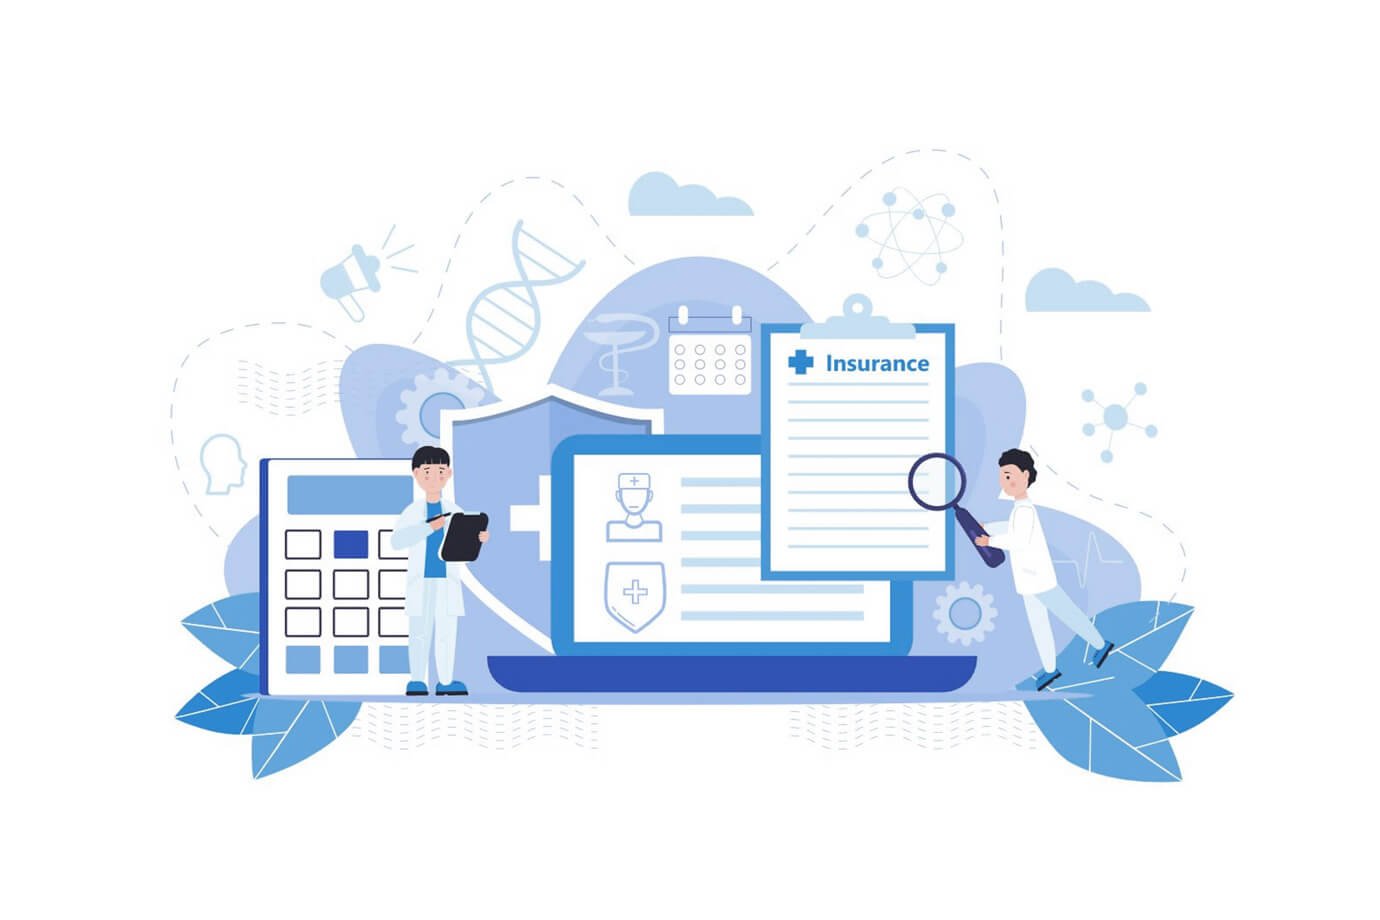 A medical professional using advanced technology to streamline Revenue Cycle Management (RCM) for US Medical Billing. eClaim Solution leads the revolution in optimizing financial efficiency and enhancing the patient experience through cutting-edge RCM solutions.